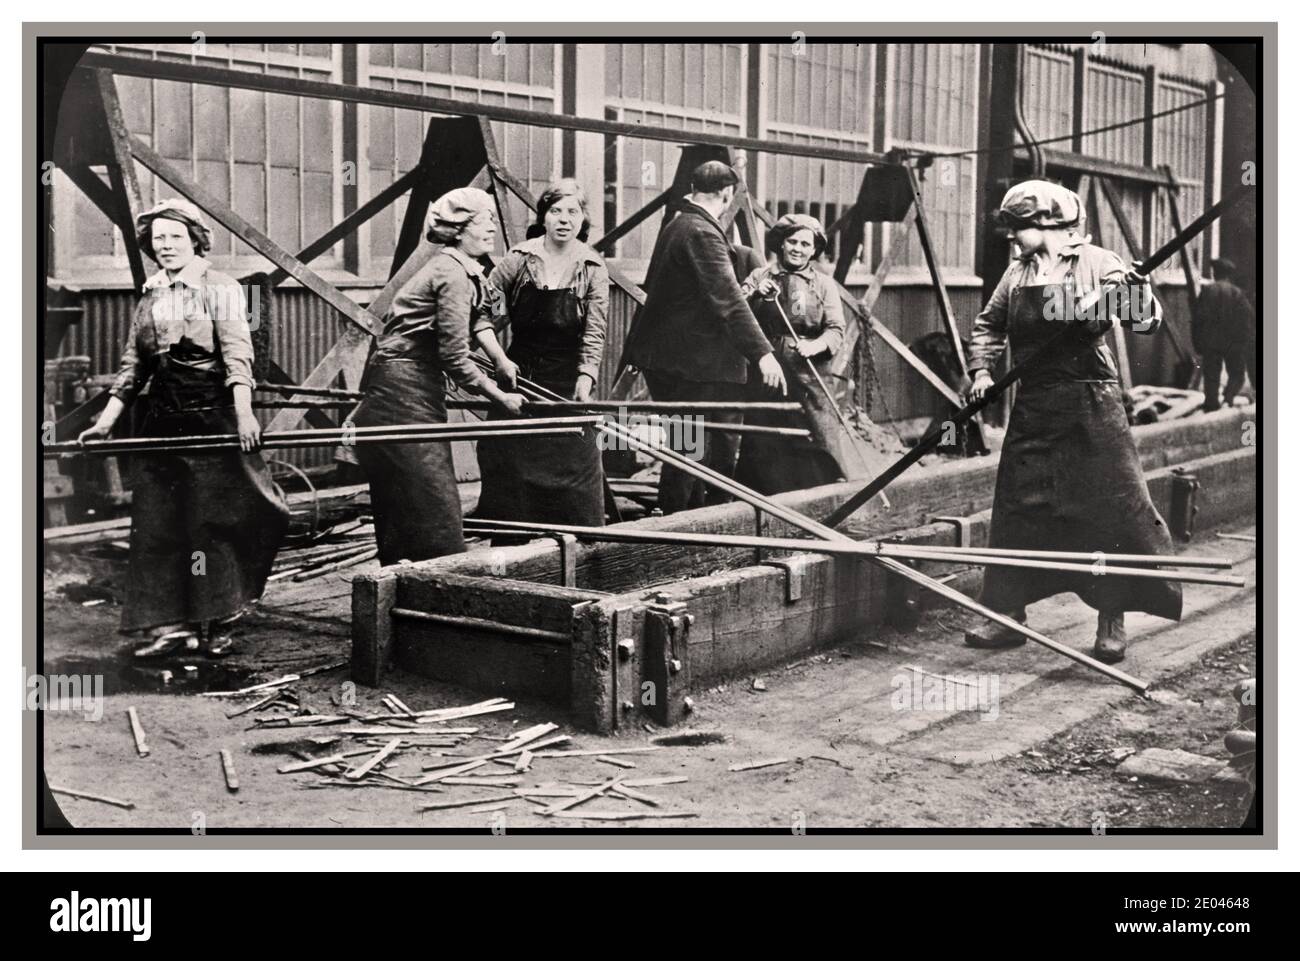 WW1 War Production Women War Workers English women in British shipbuilding yards, women at work building navy ships during World War in England. [between ca. 1915 and ca. 1920] World War, 1914-1918 Photograph published in the Illustrated London News, June 10, 1916, with caption: 'Praised for their industry and obedience: Women at a naval ship-building yard.' Stock Photo